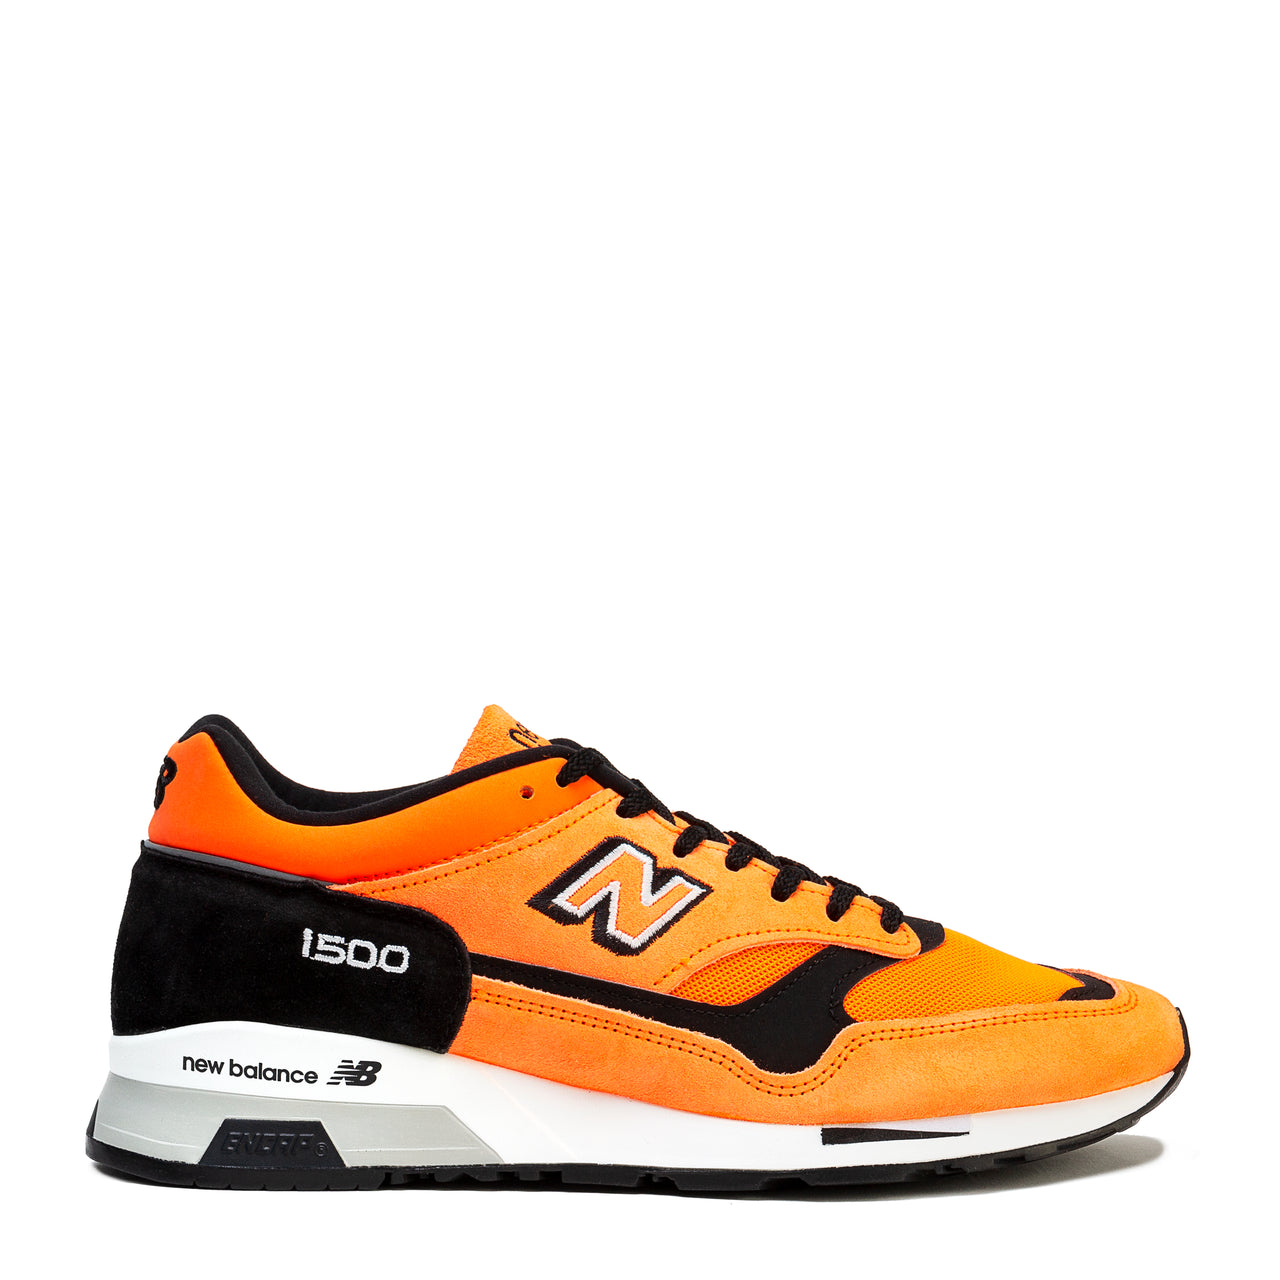 new balance 1500 made in uk